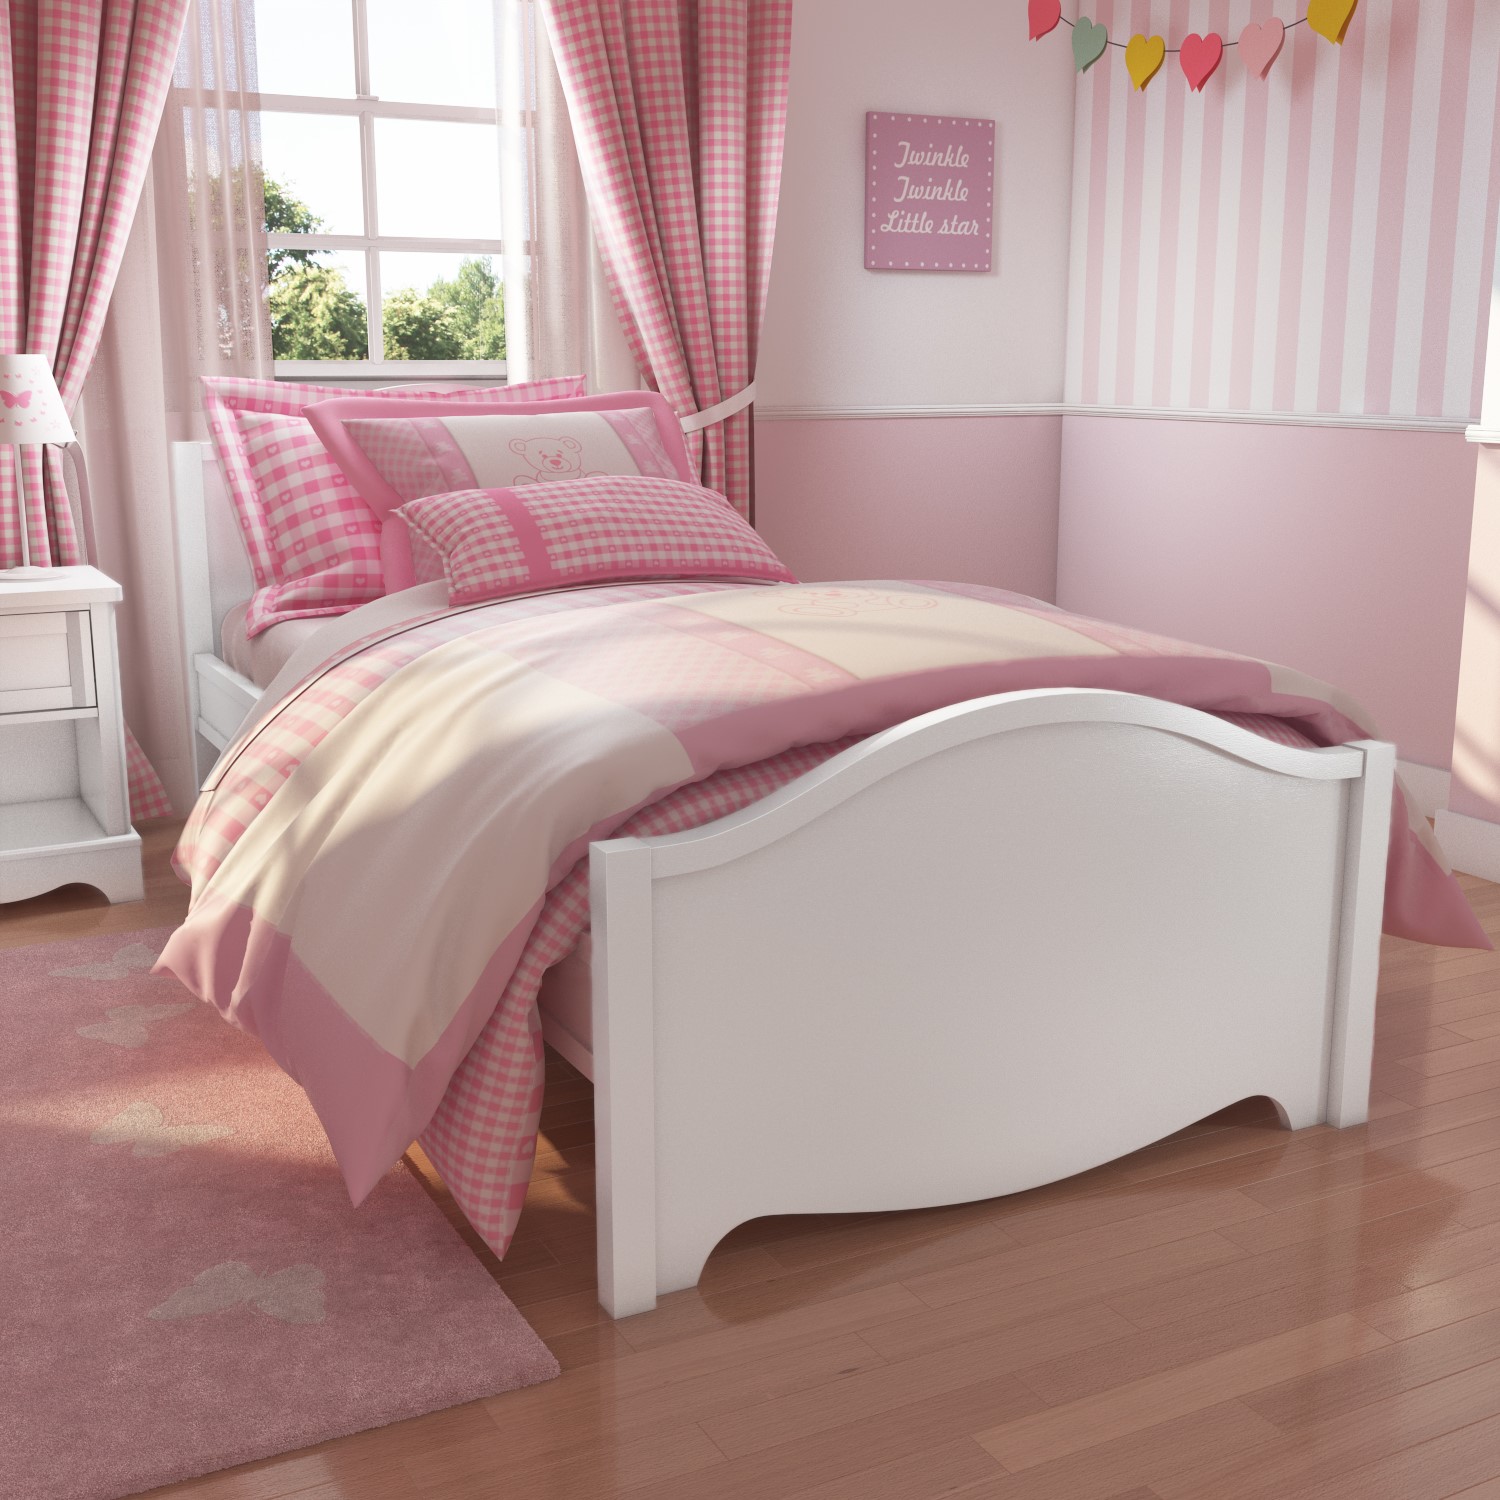 single bed designs for girls